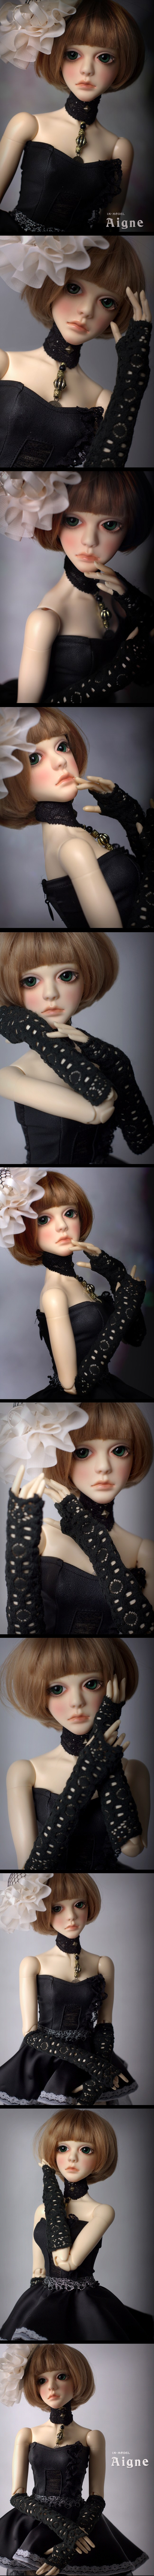 BJD Aigne 56cm Girl Ball-jointed Doll